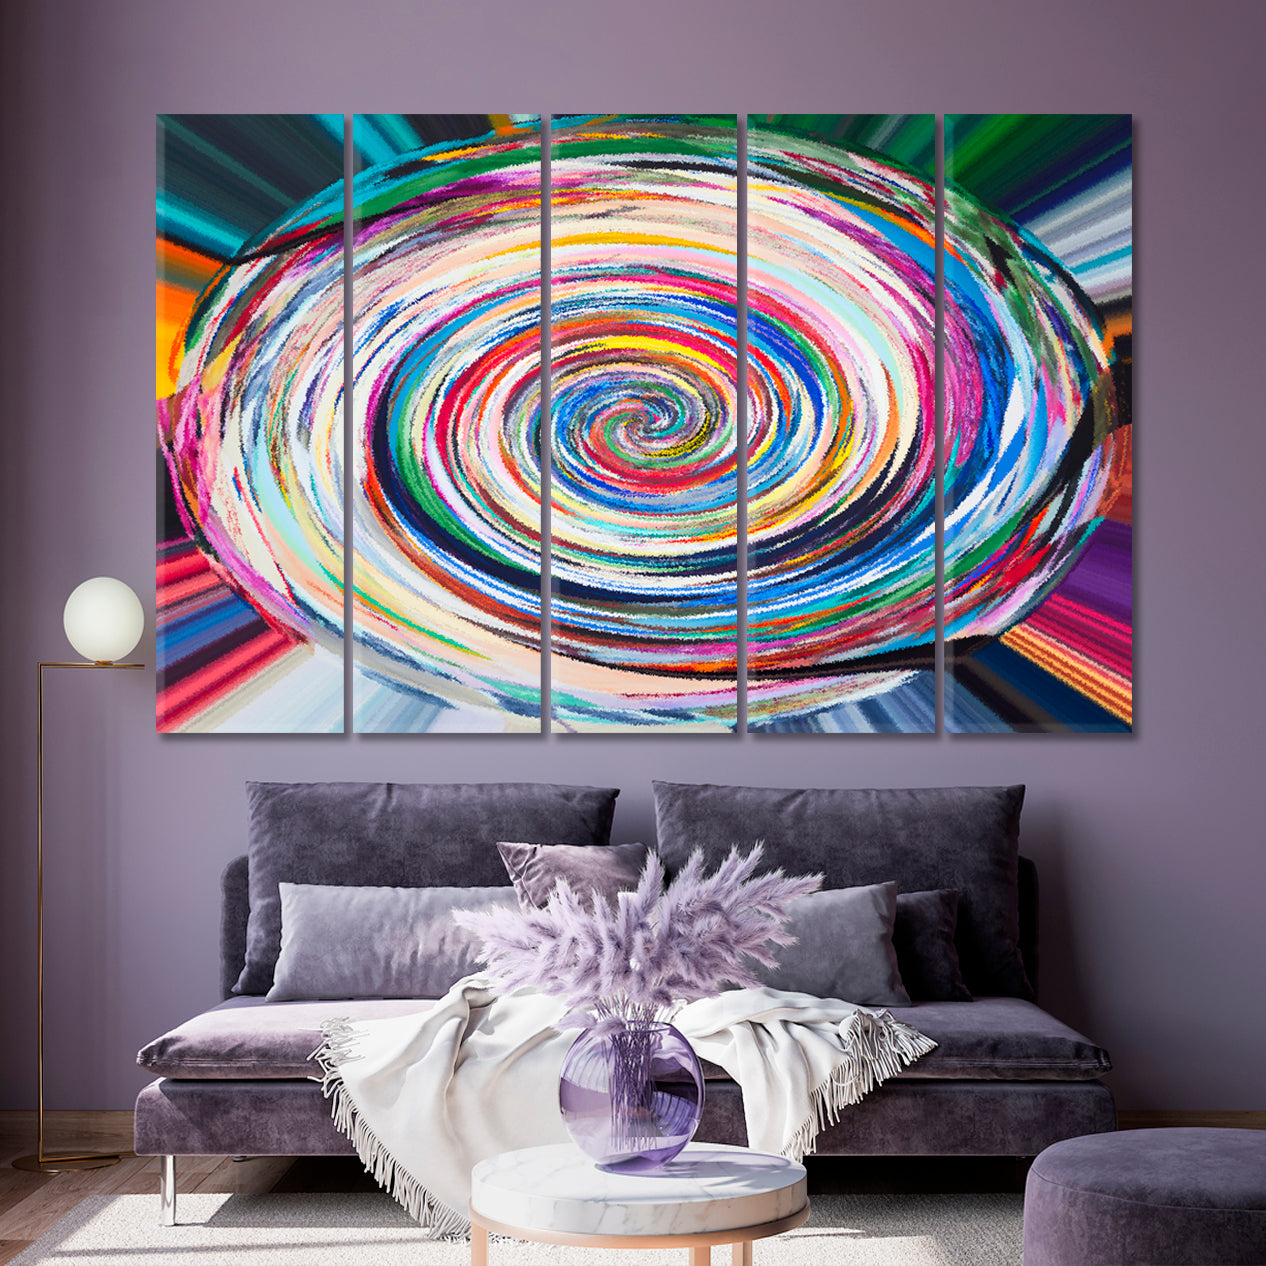 VORTEX Abstract Expressionism Swirl Forms Lines Shapes Abstract Art Print Artesty 5 panels 36" x 24" 